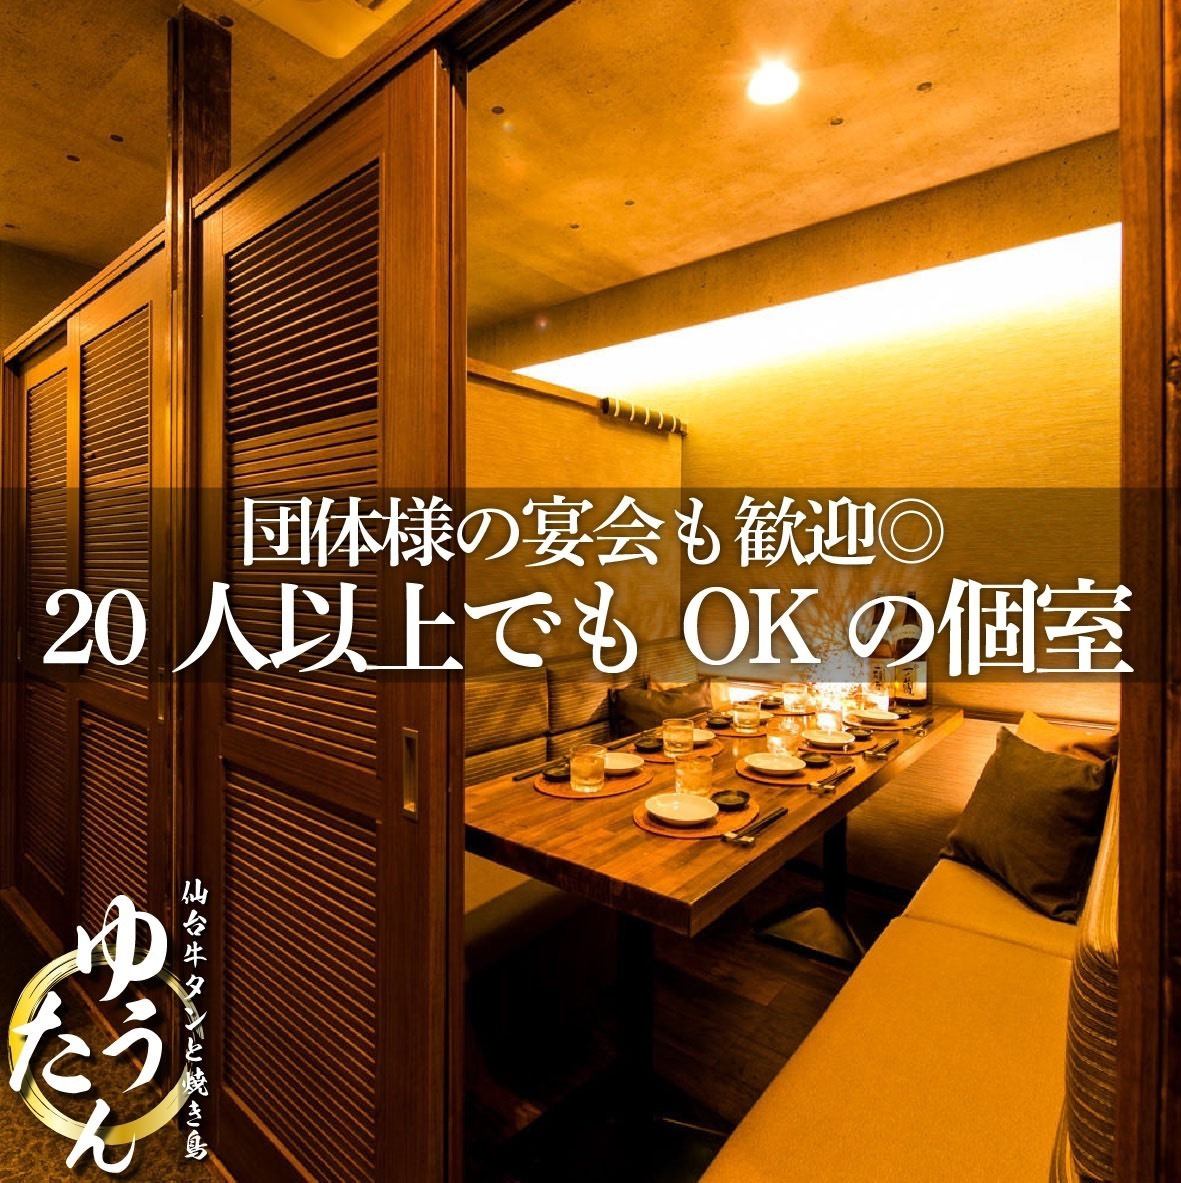 Coupons available for event organizers ◎ Private rooms with a relaxing atmosphere available ♪